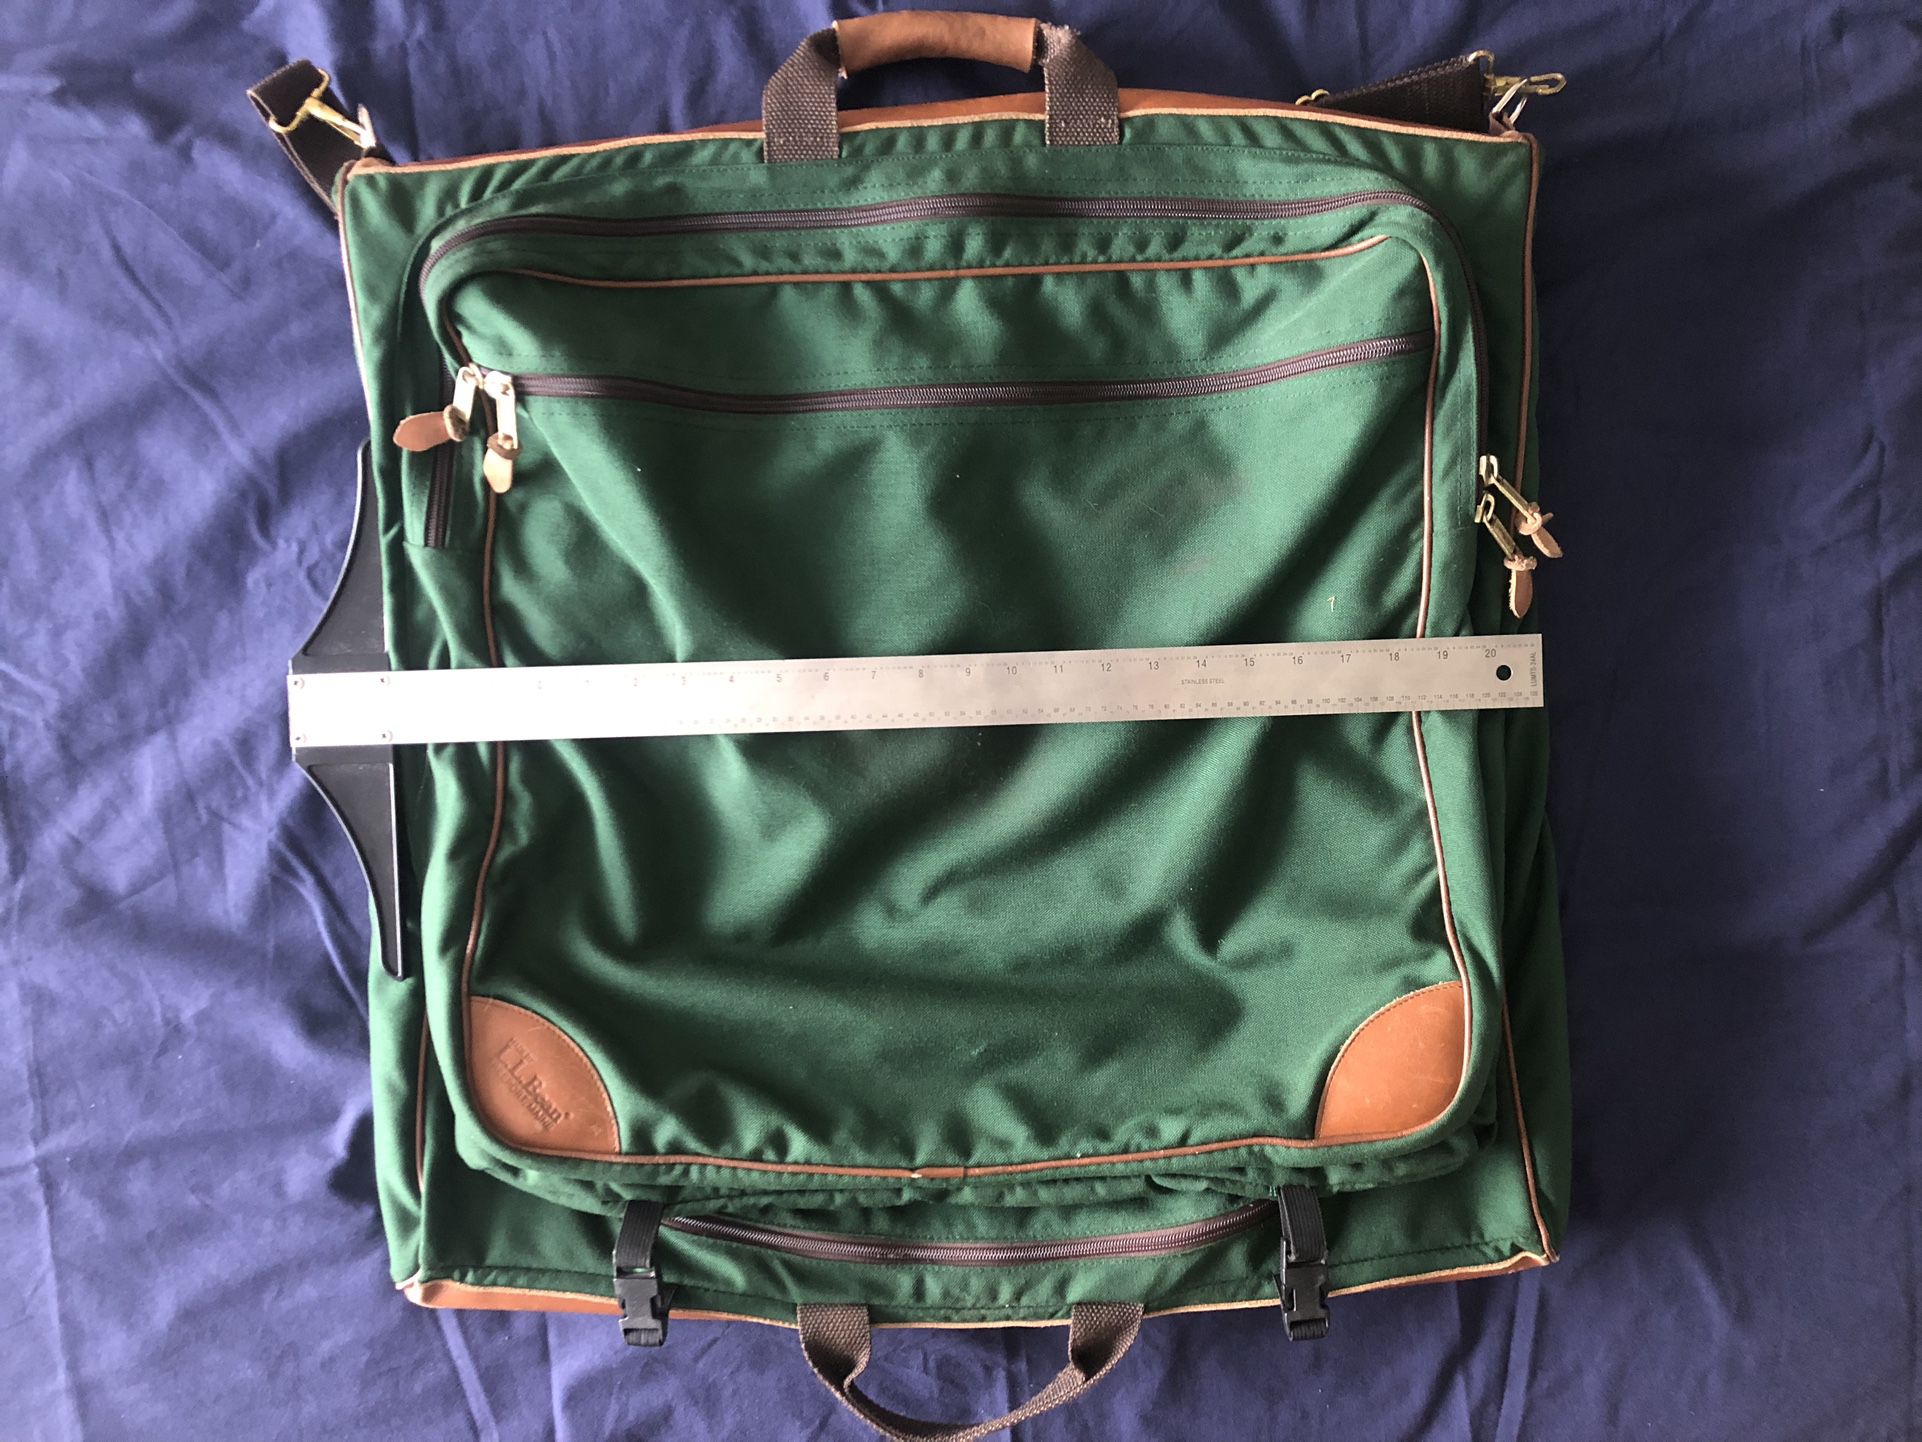 Vintage 80s 90s LL BEAN Green Canvas Leather Folding Garment Suit Carrying Bag Travel